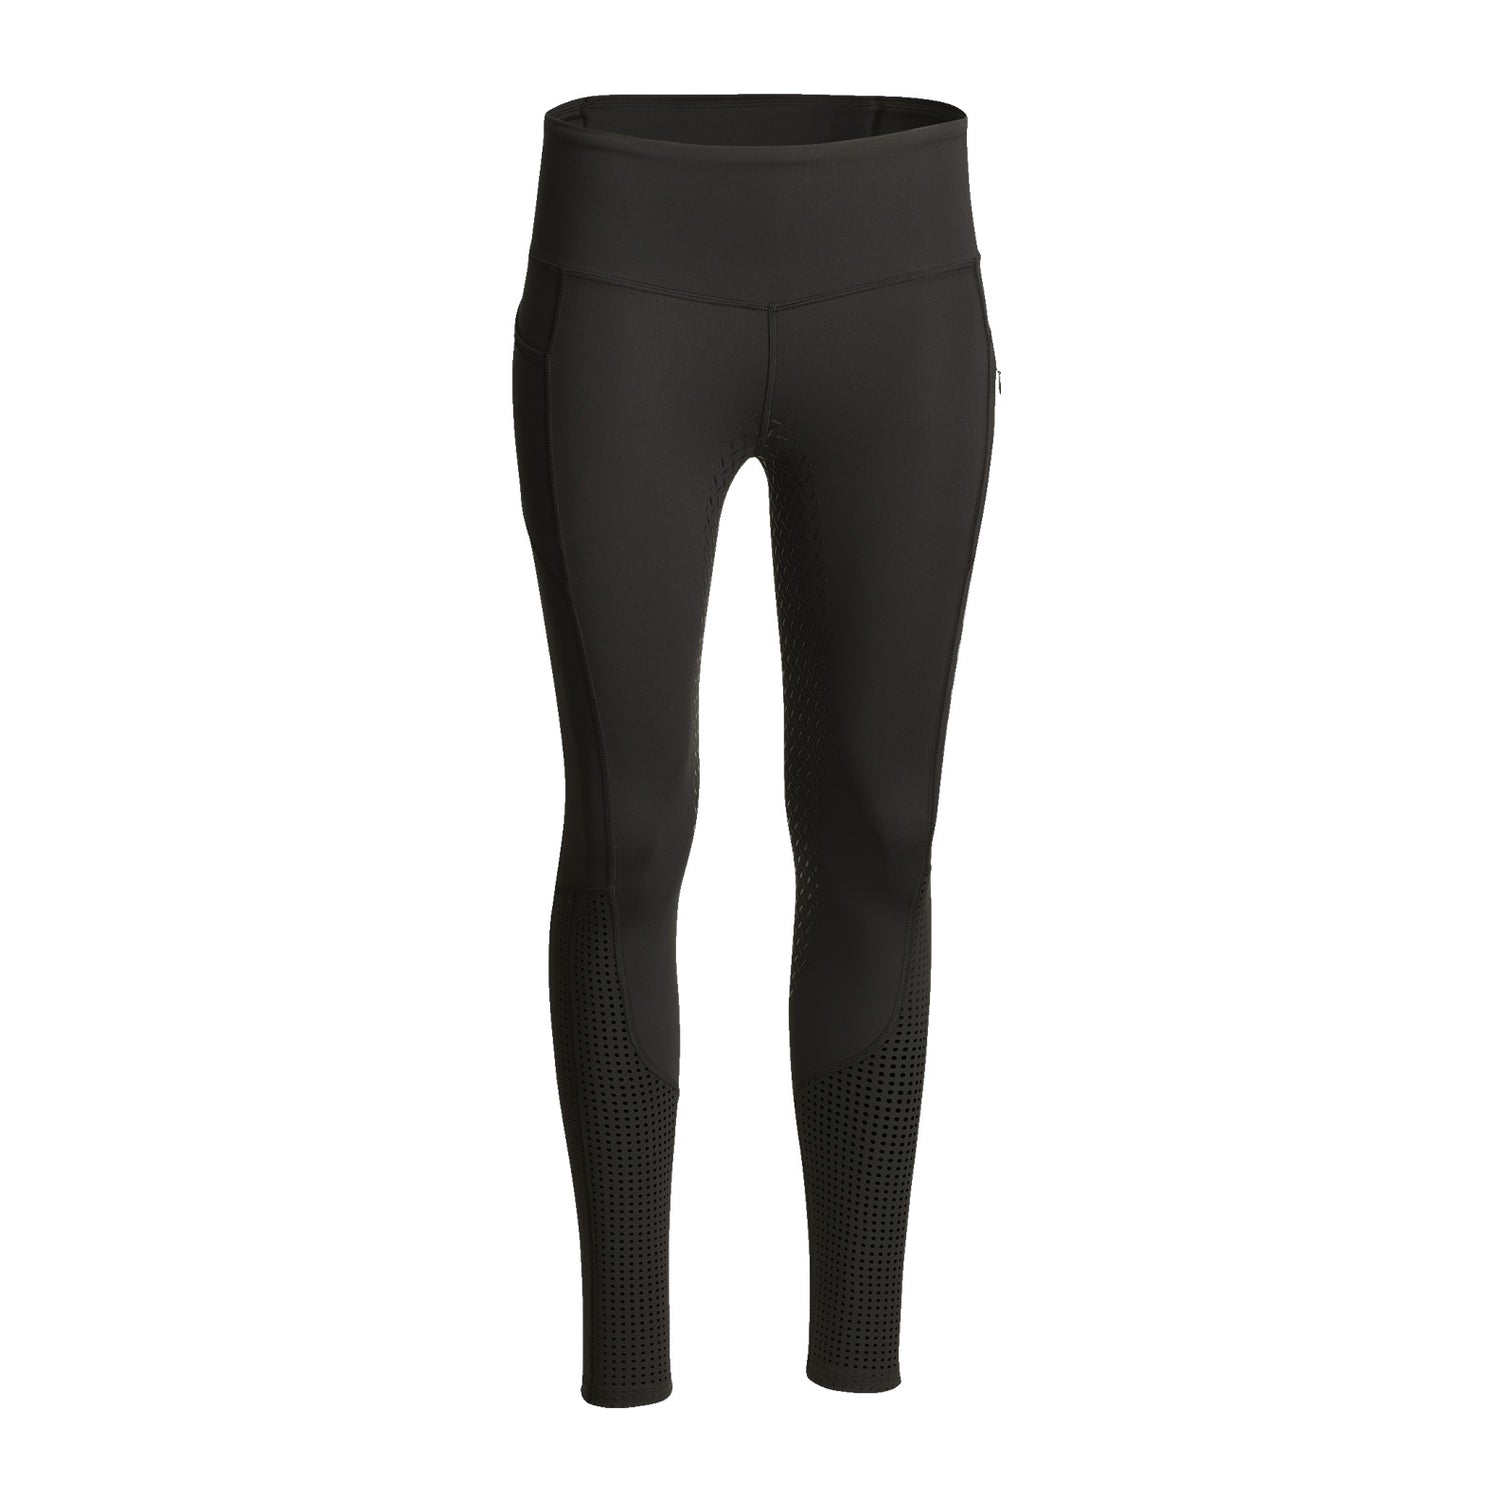 Ariat Womens Riding Tights, Buy Ariat Riding Tights Online